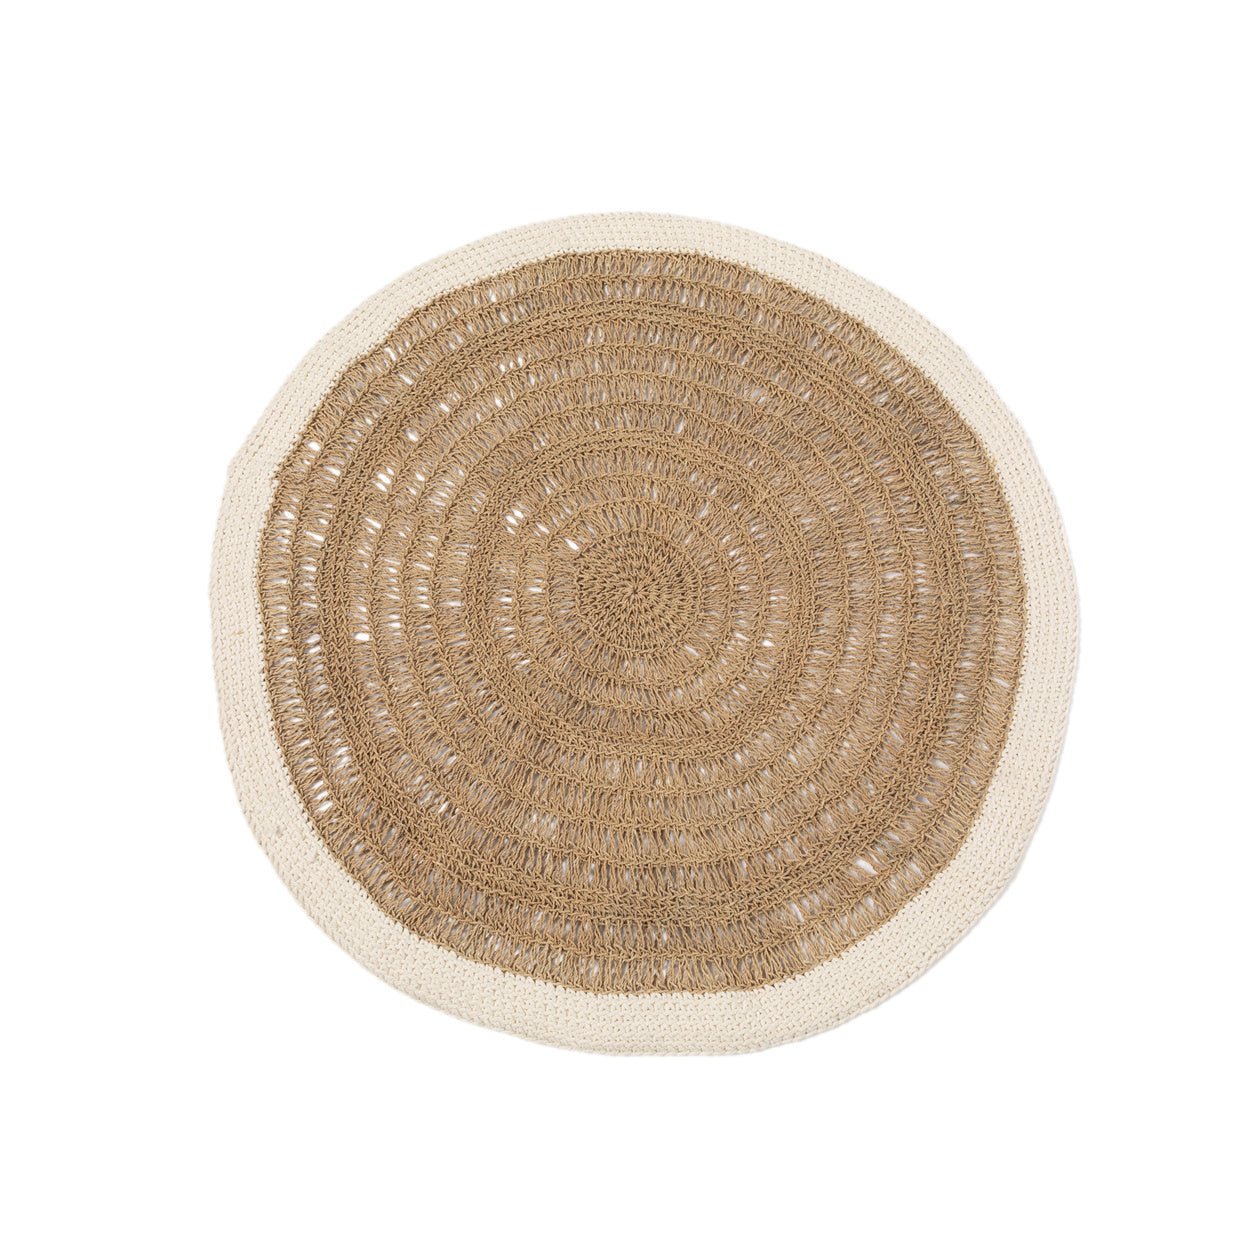 The round seagrass and cotton carpet - Natural white - 100